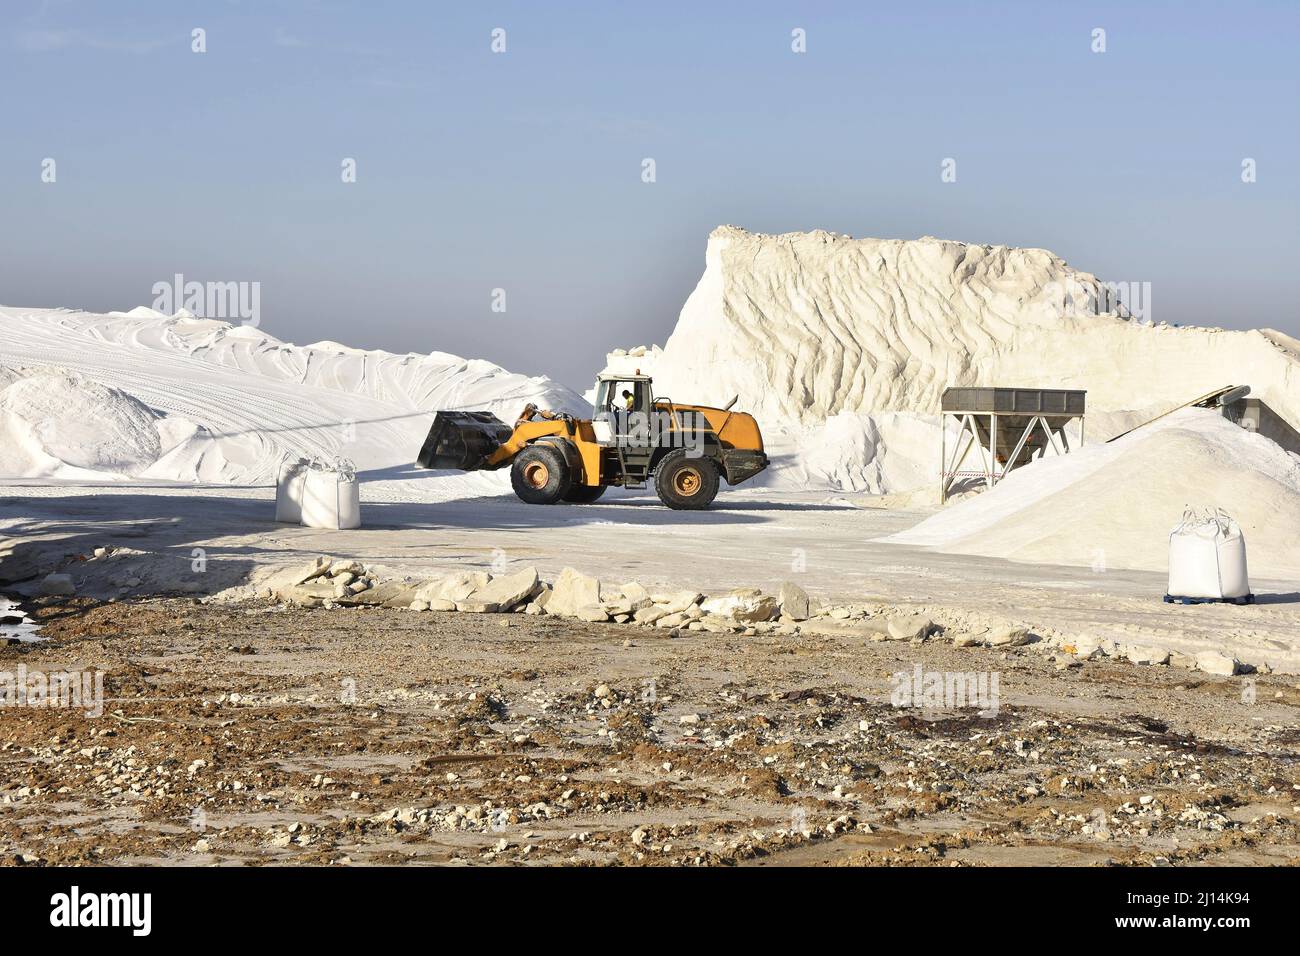 Salt production site, salt is being heaped up after harvesting from the saline ponds, Huelva Spain Europe. Stock Photo